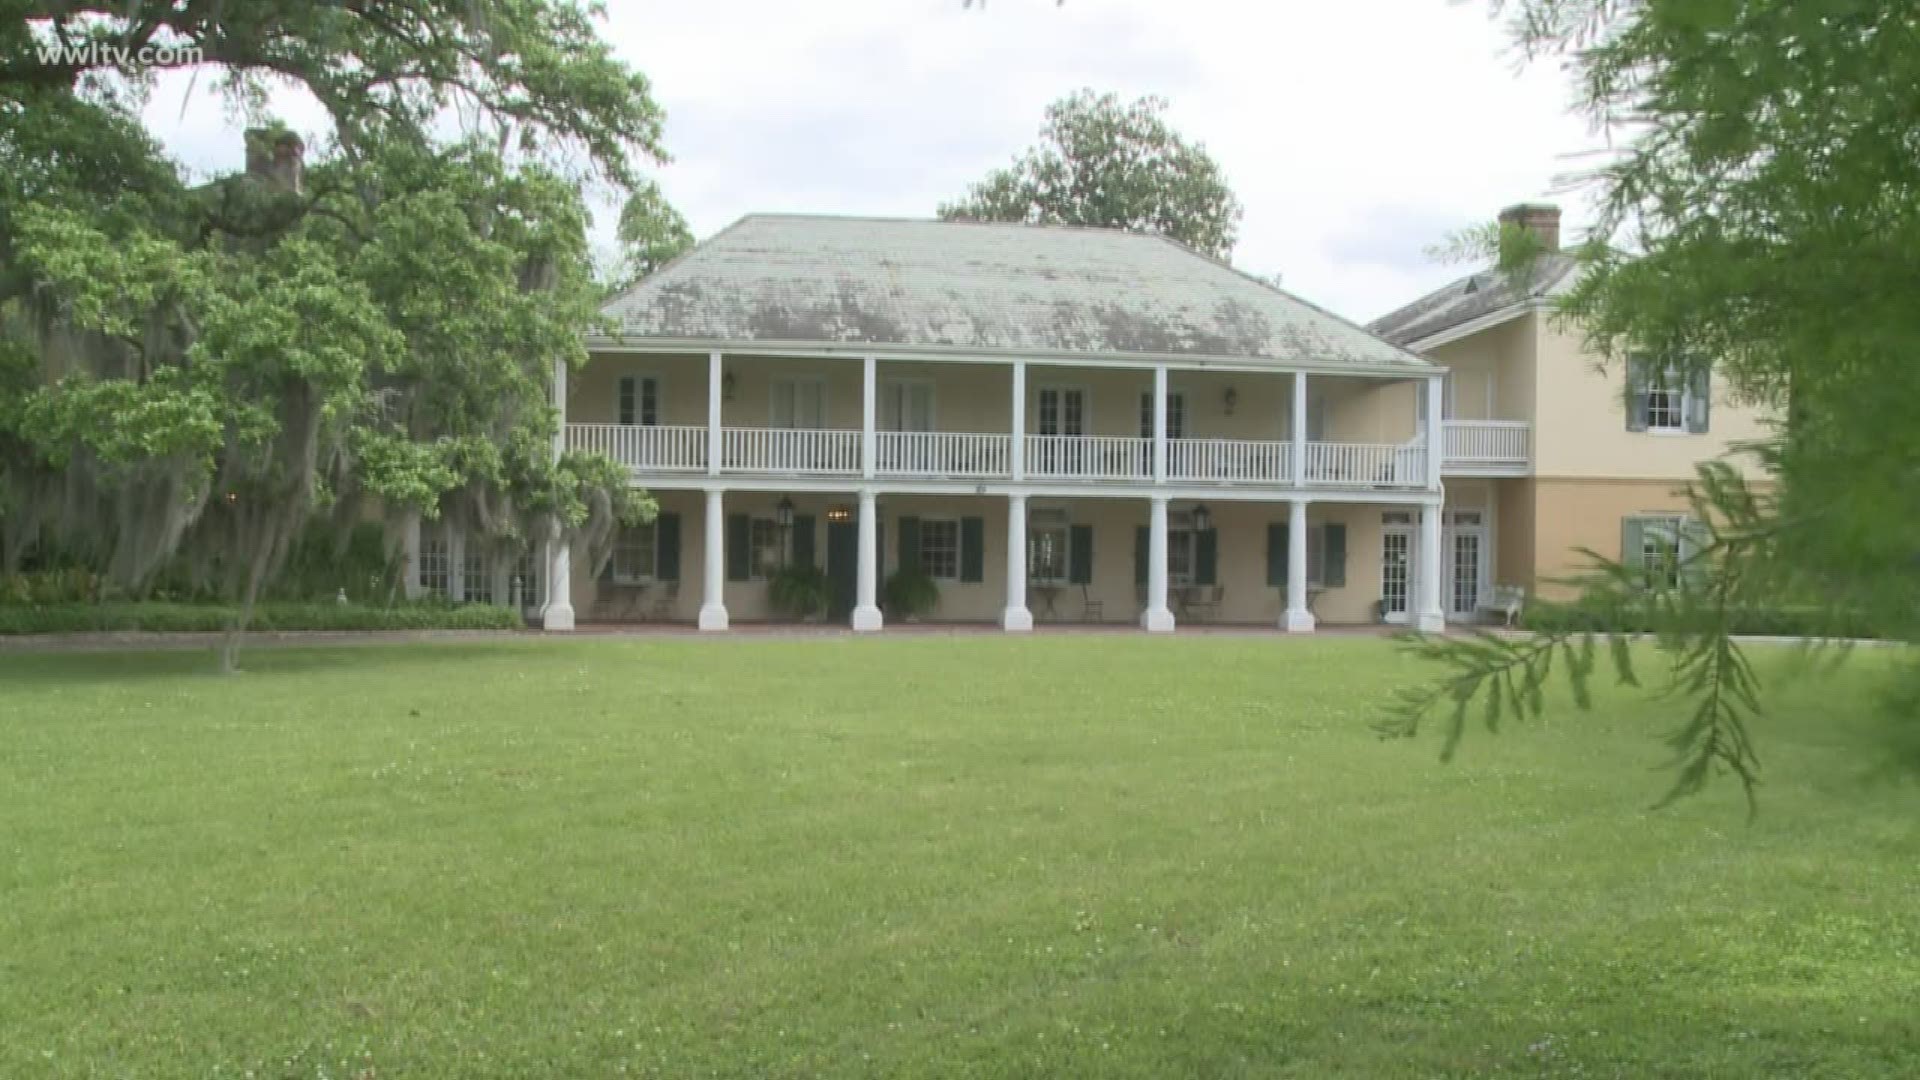 The Ormond Plantation is a popular destination for weddings and has a restaurant open to the public.